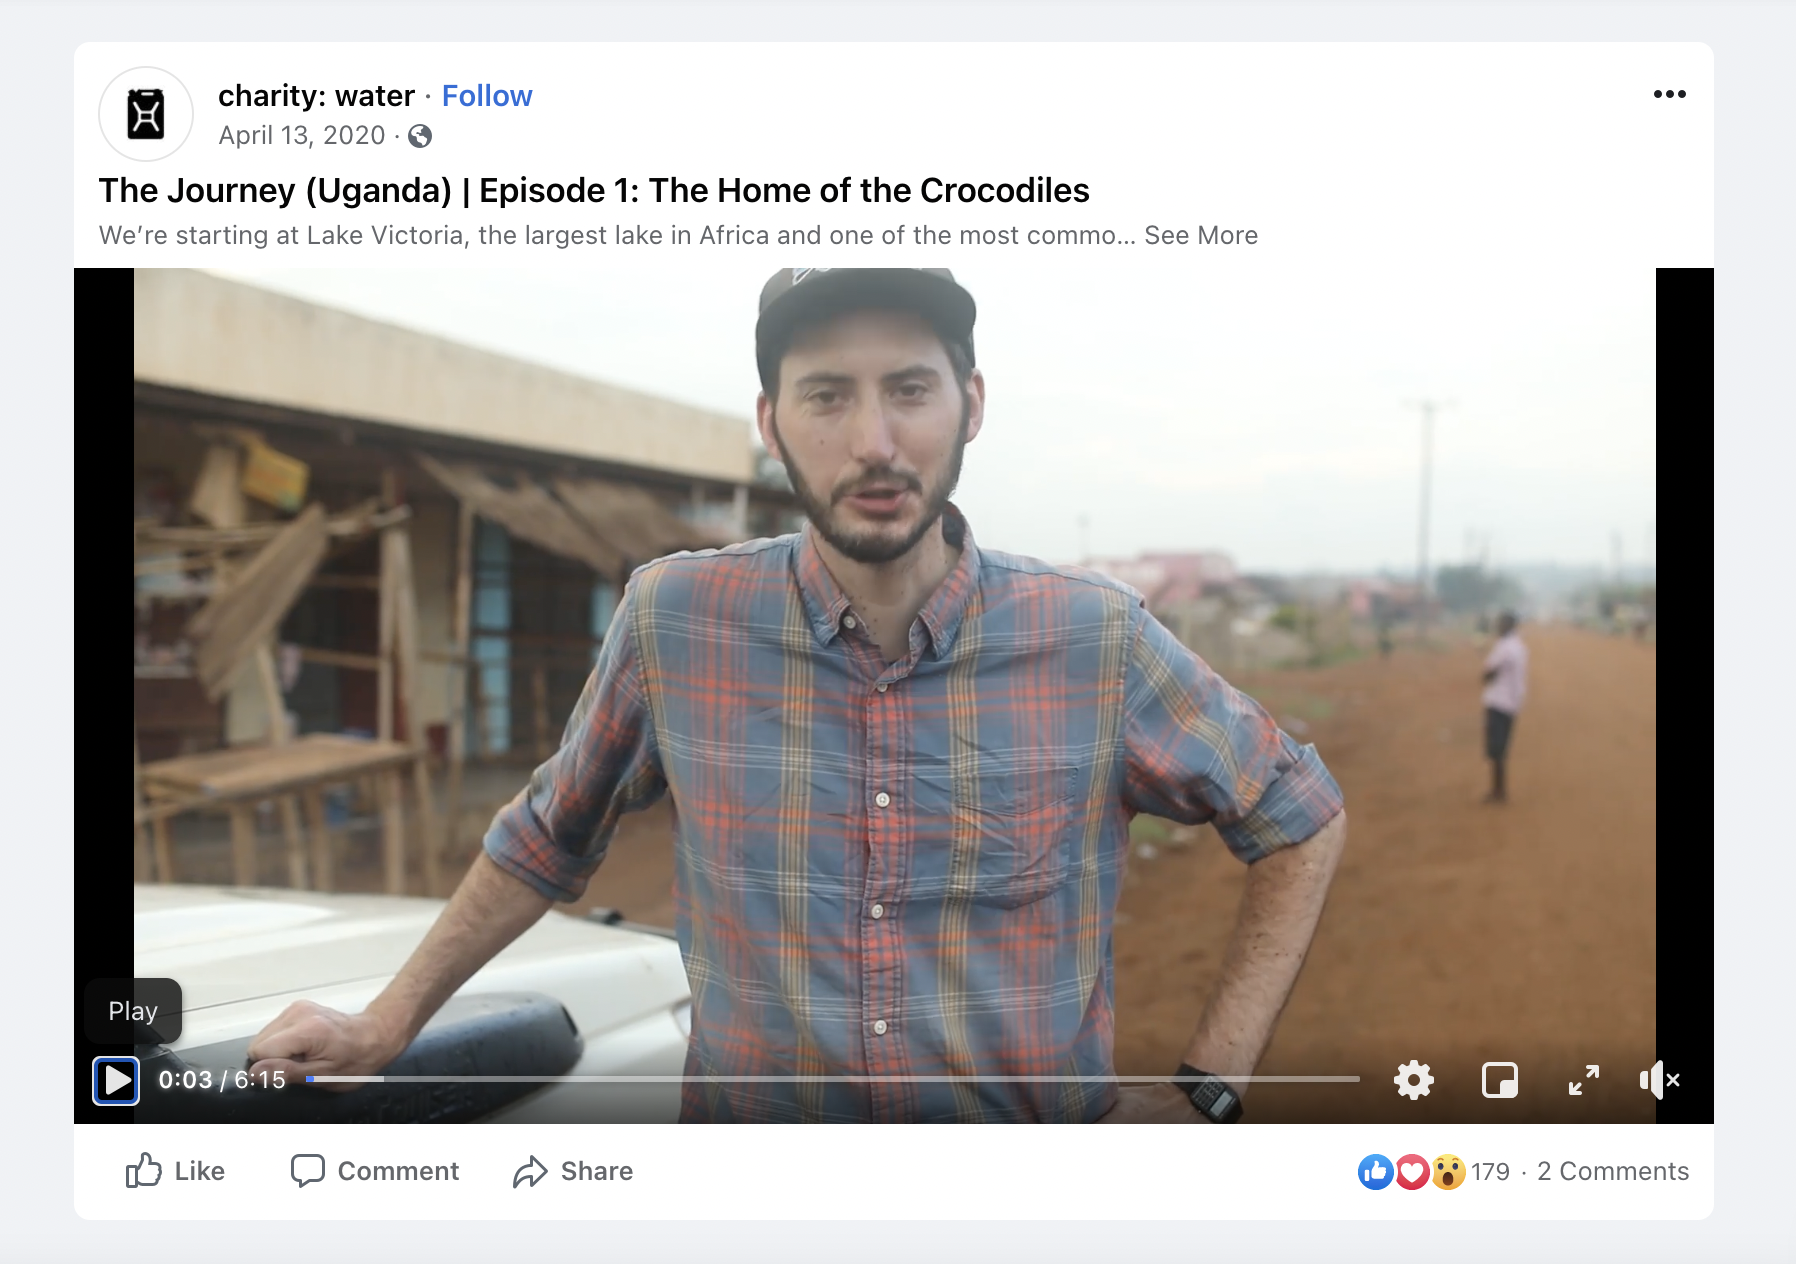 facebook marketing most successful brands charity water video example